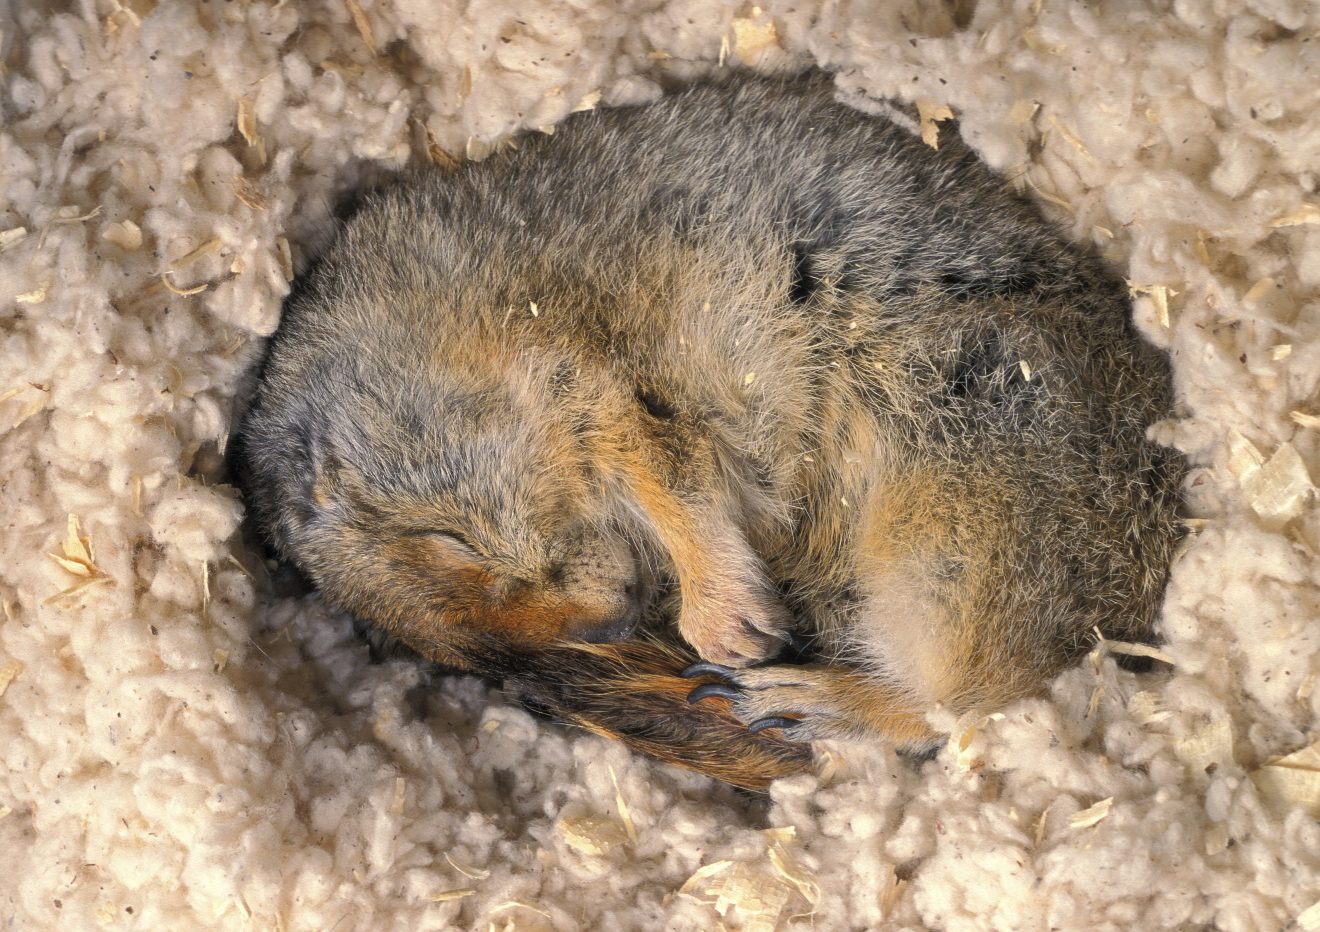 Sleeping ground squirrel curled up in a nest of soft, light-colored material.